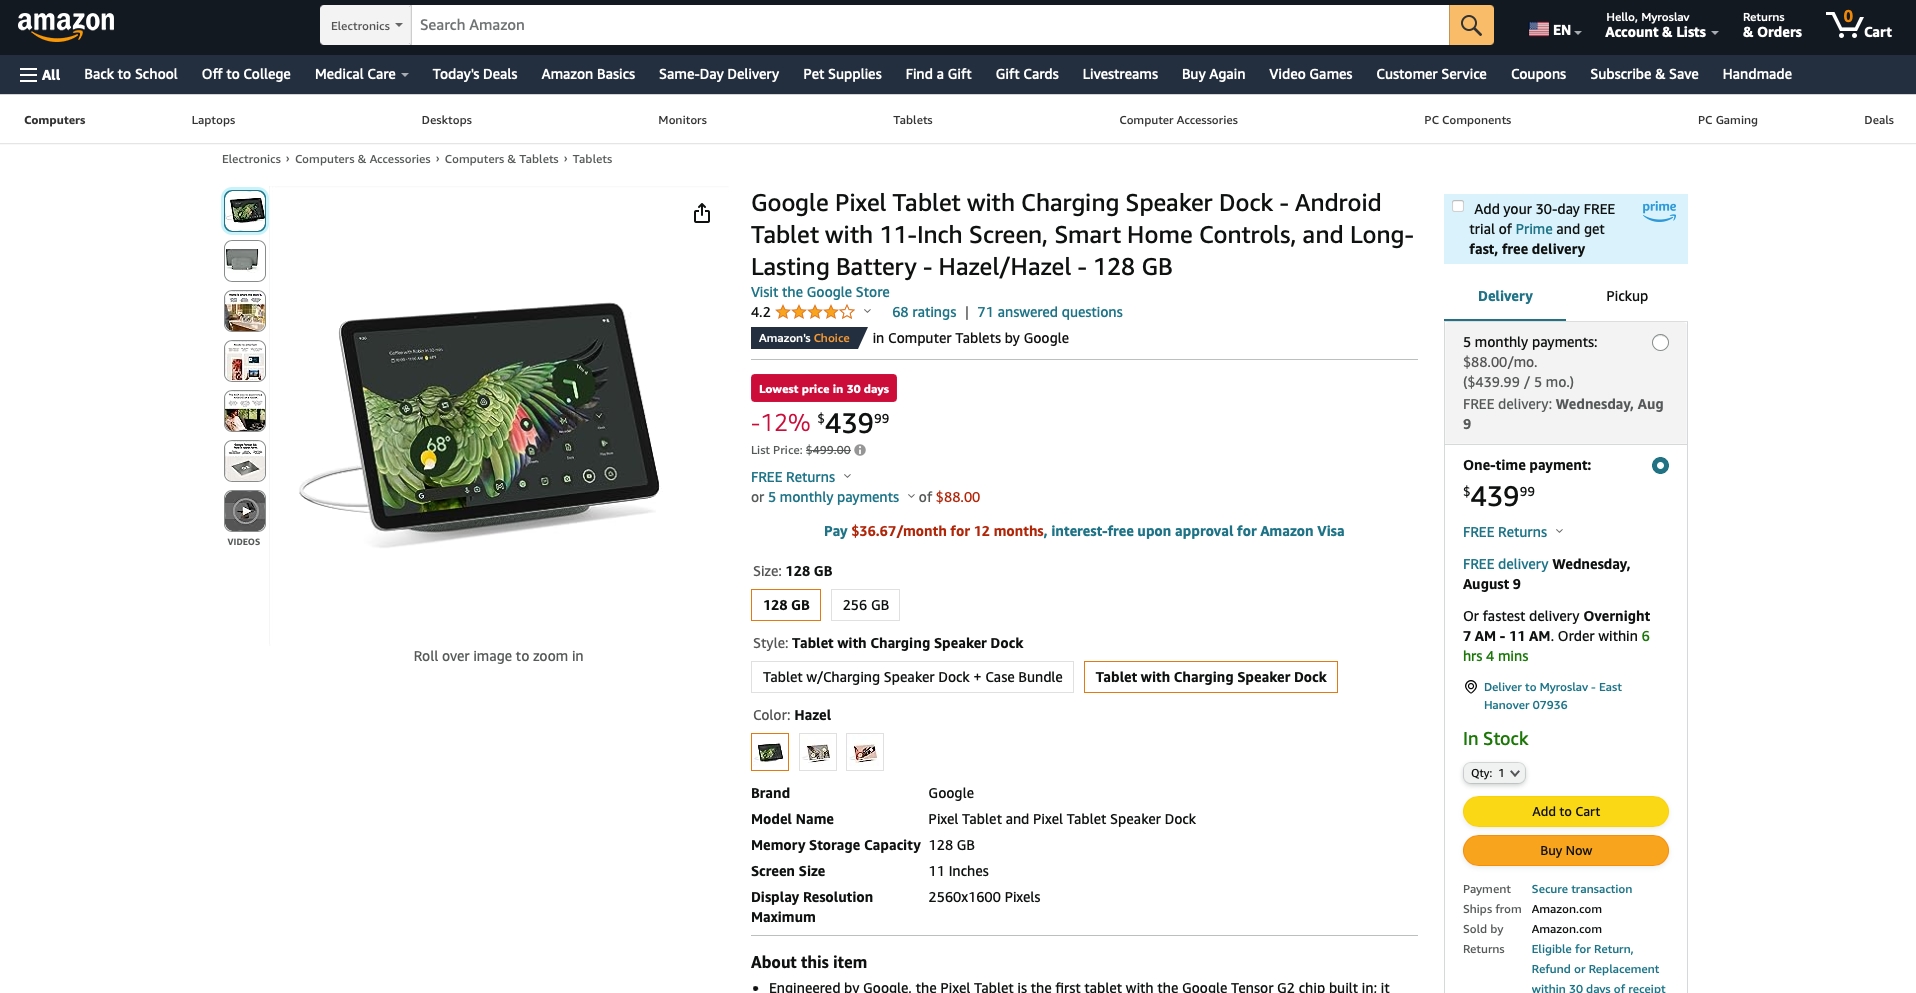 Up to $80 off: the Tablet is Google Amazon a on sale on price for promotional Pixel